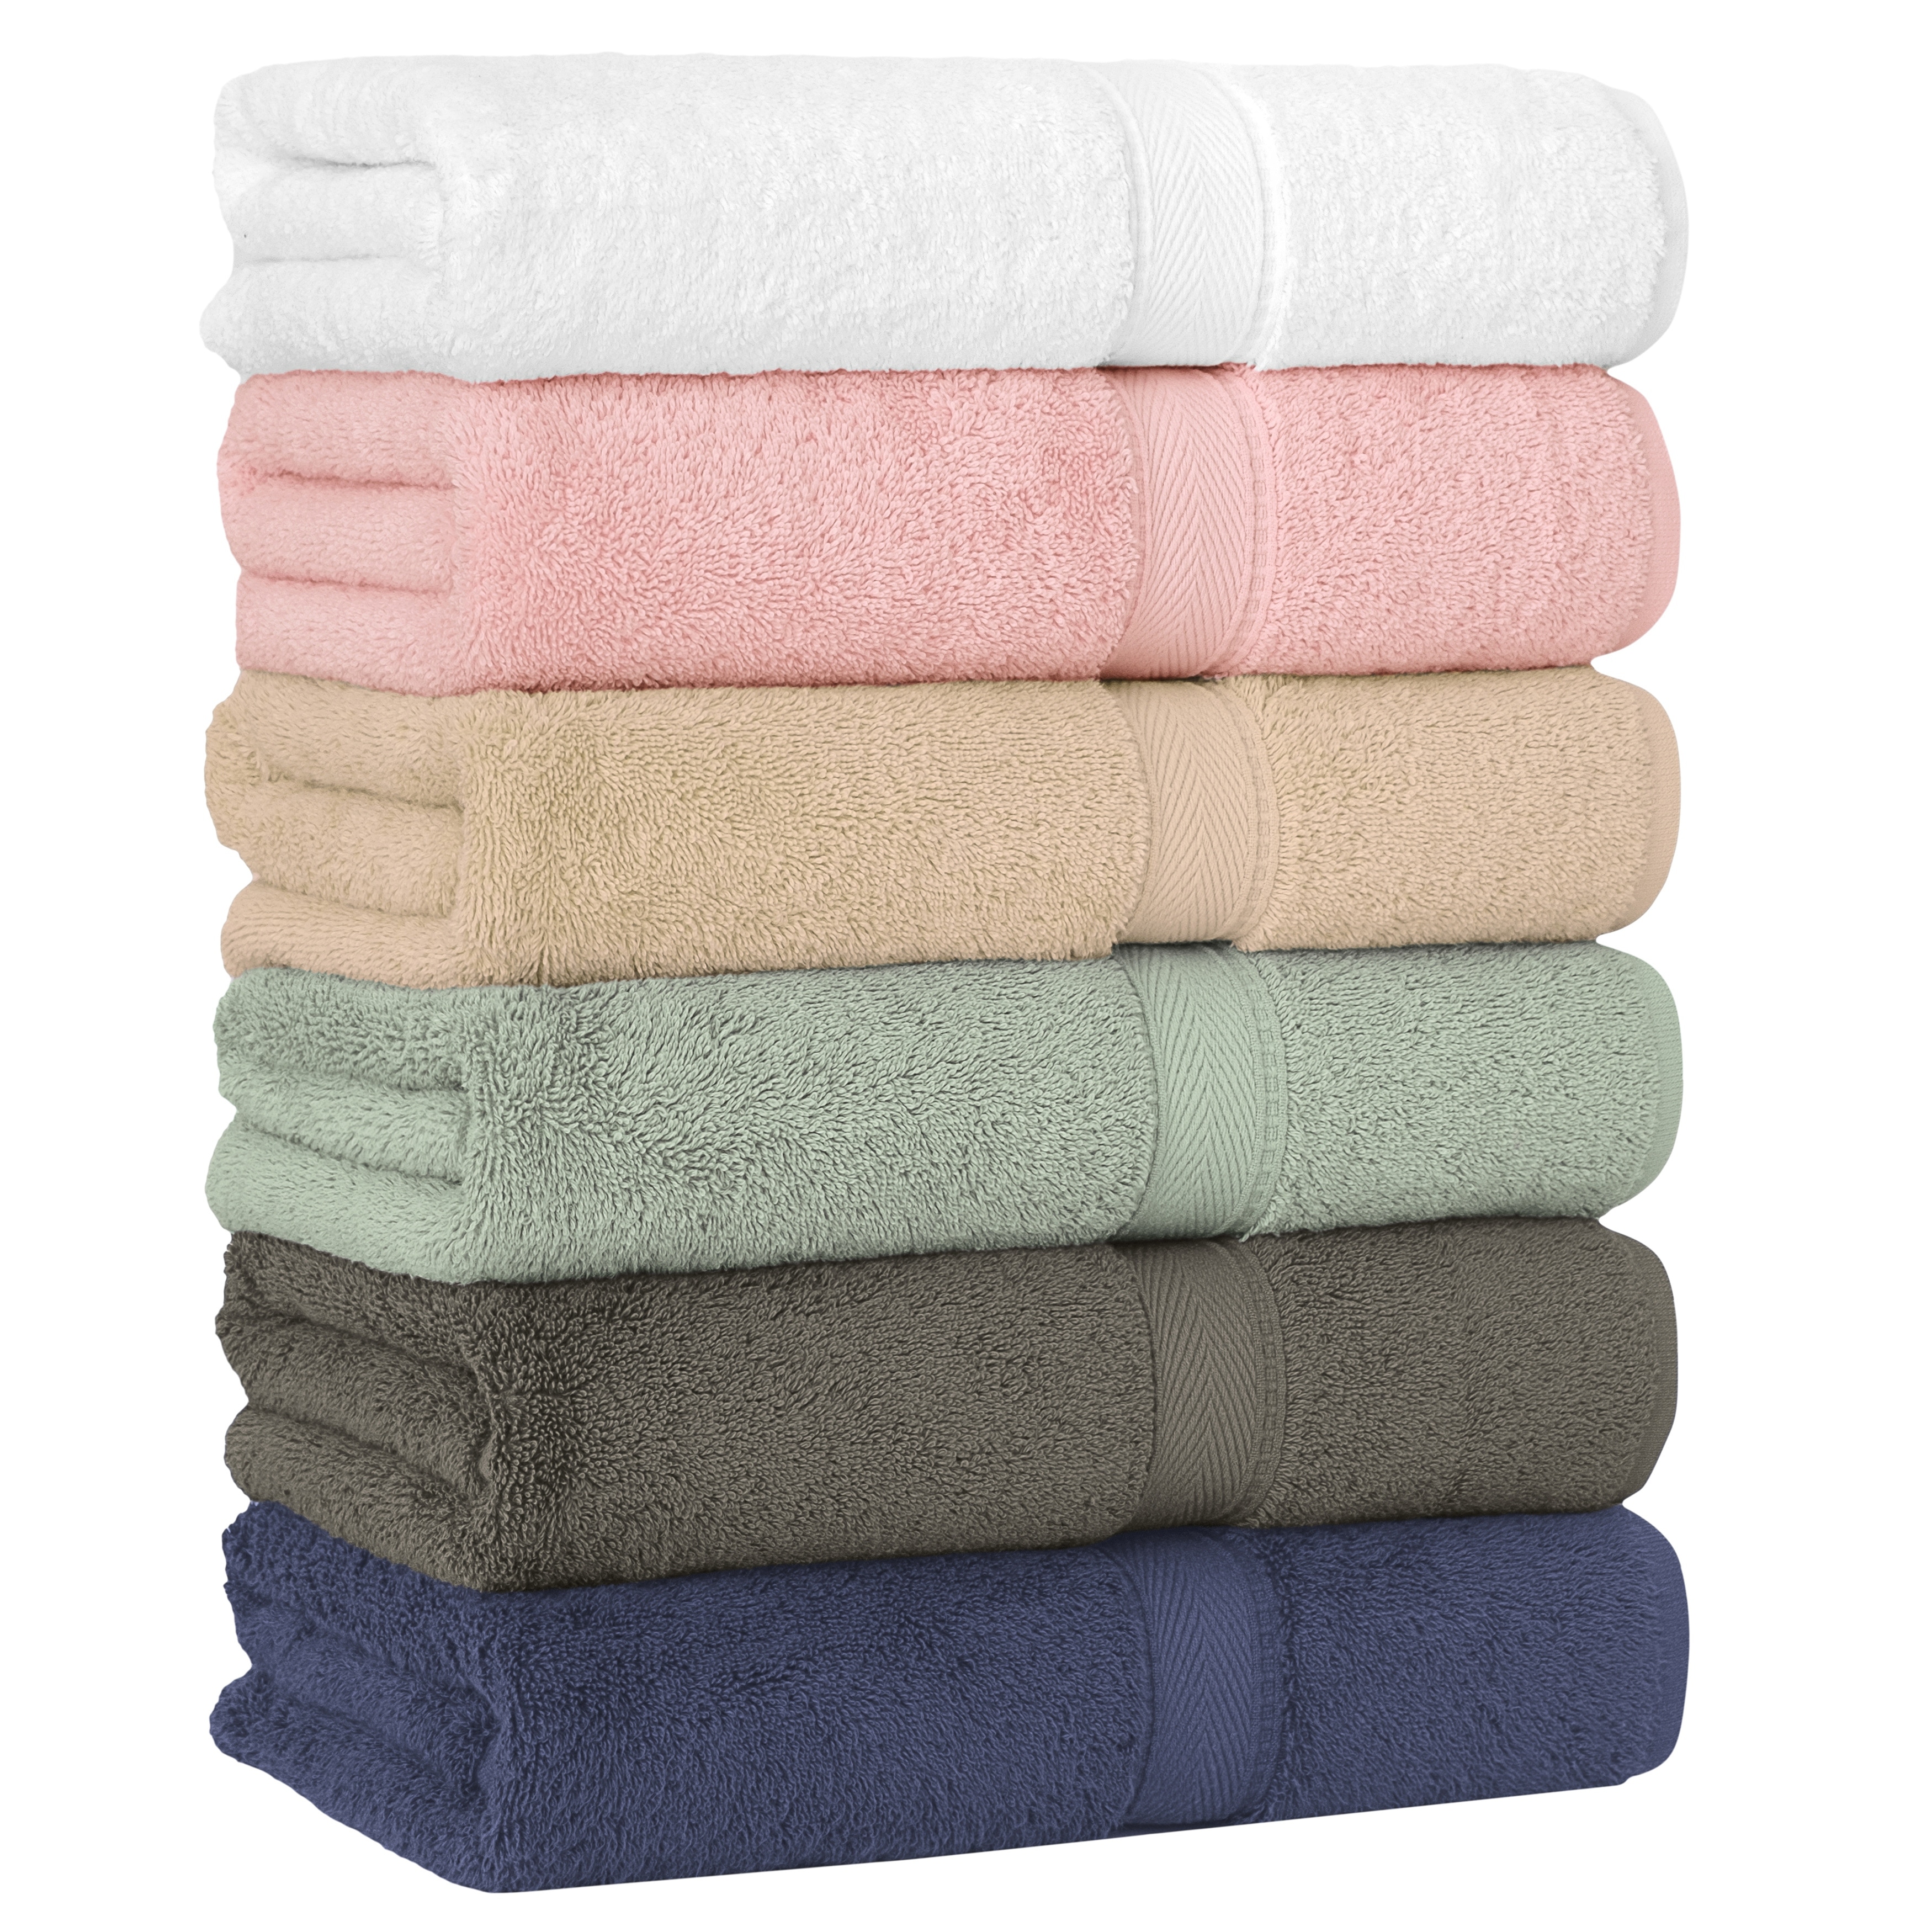 https://ak1.ostkcdn.com/images/products/is/images/direct/e0a1bac4b1ffe6b78bd4019c6c356bf181172fe9/Authentic-Hotel-and-Spa-Turkish-Cotton-Bath-Towels-%28Set-of-4%29.jpg